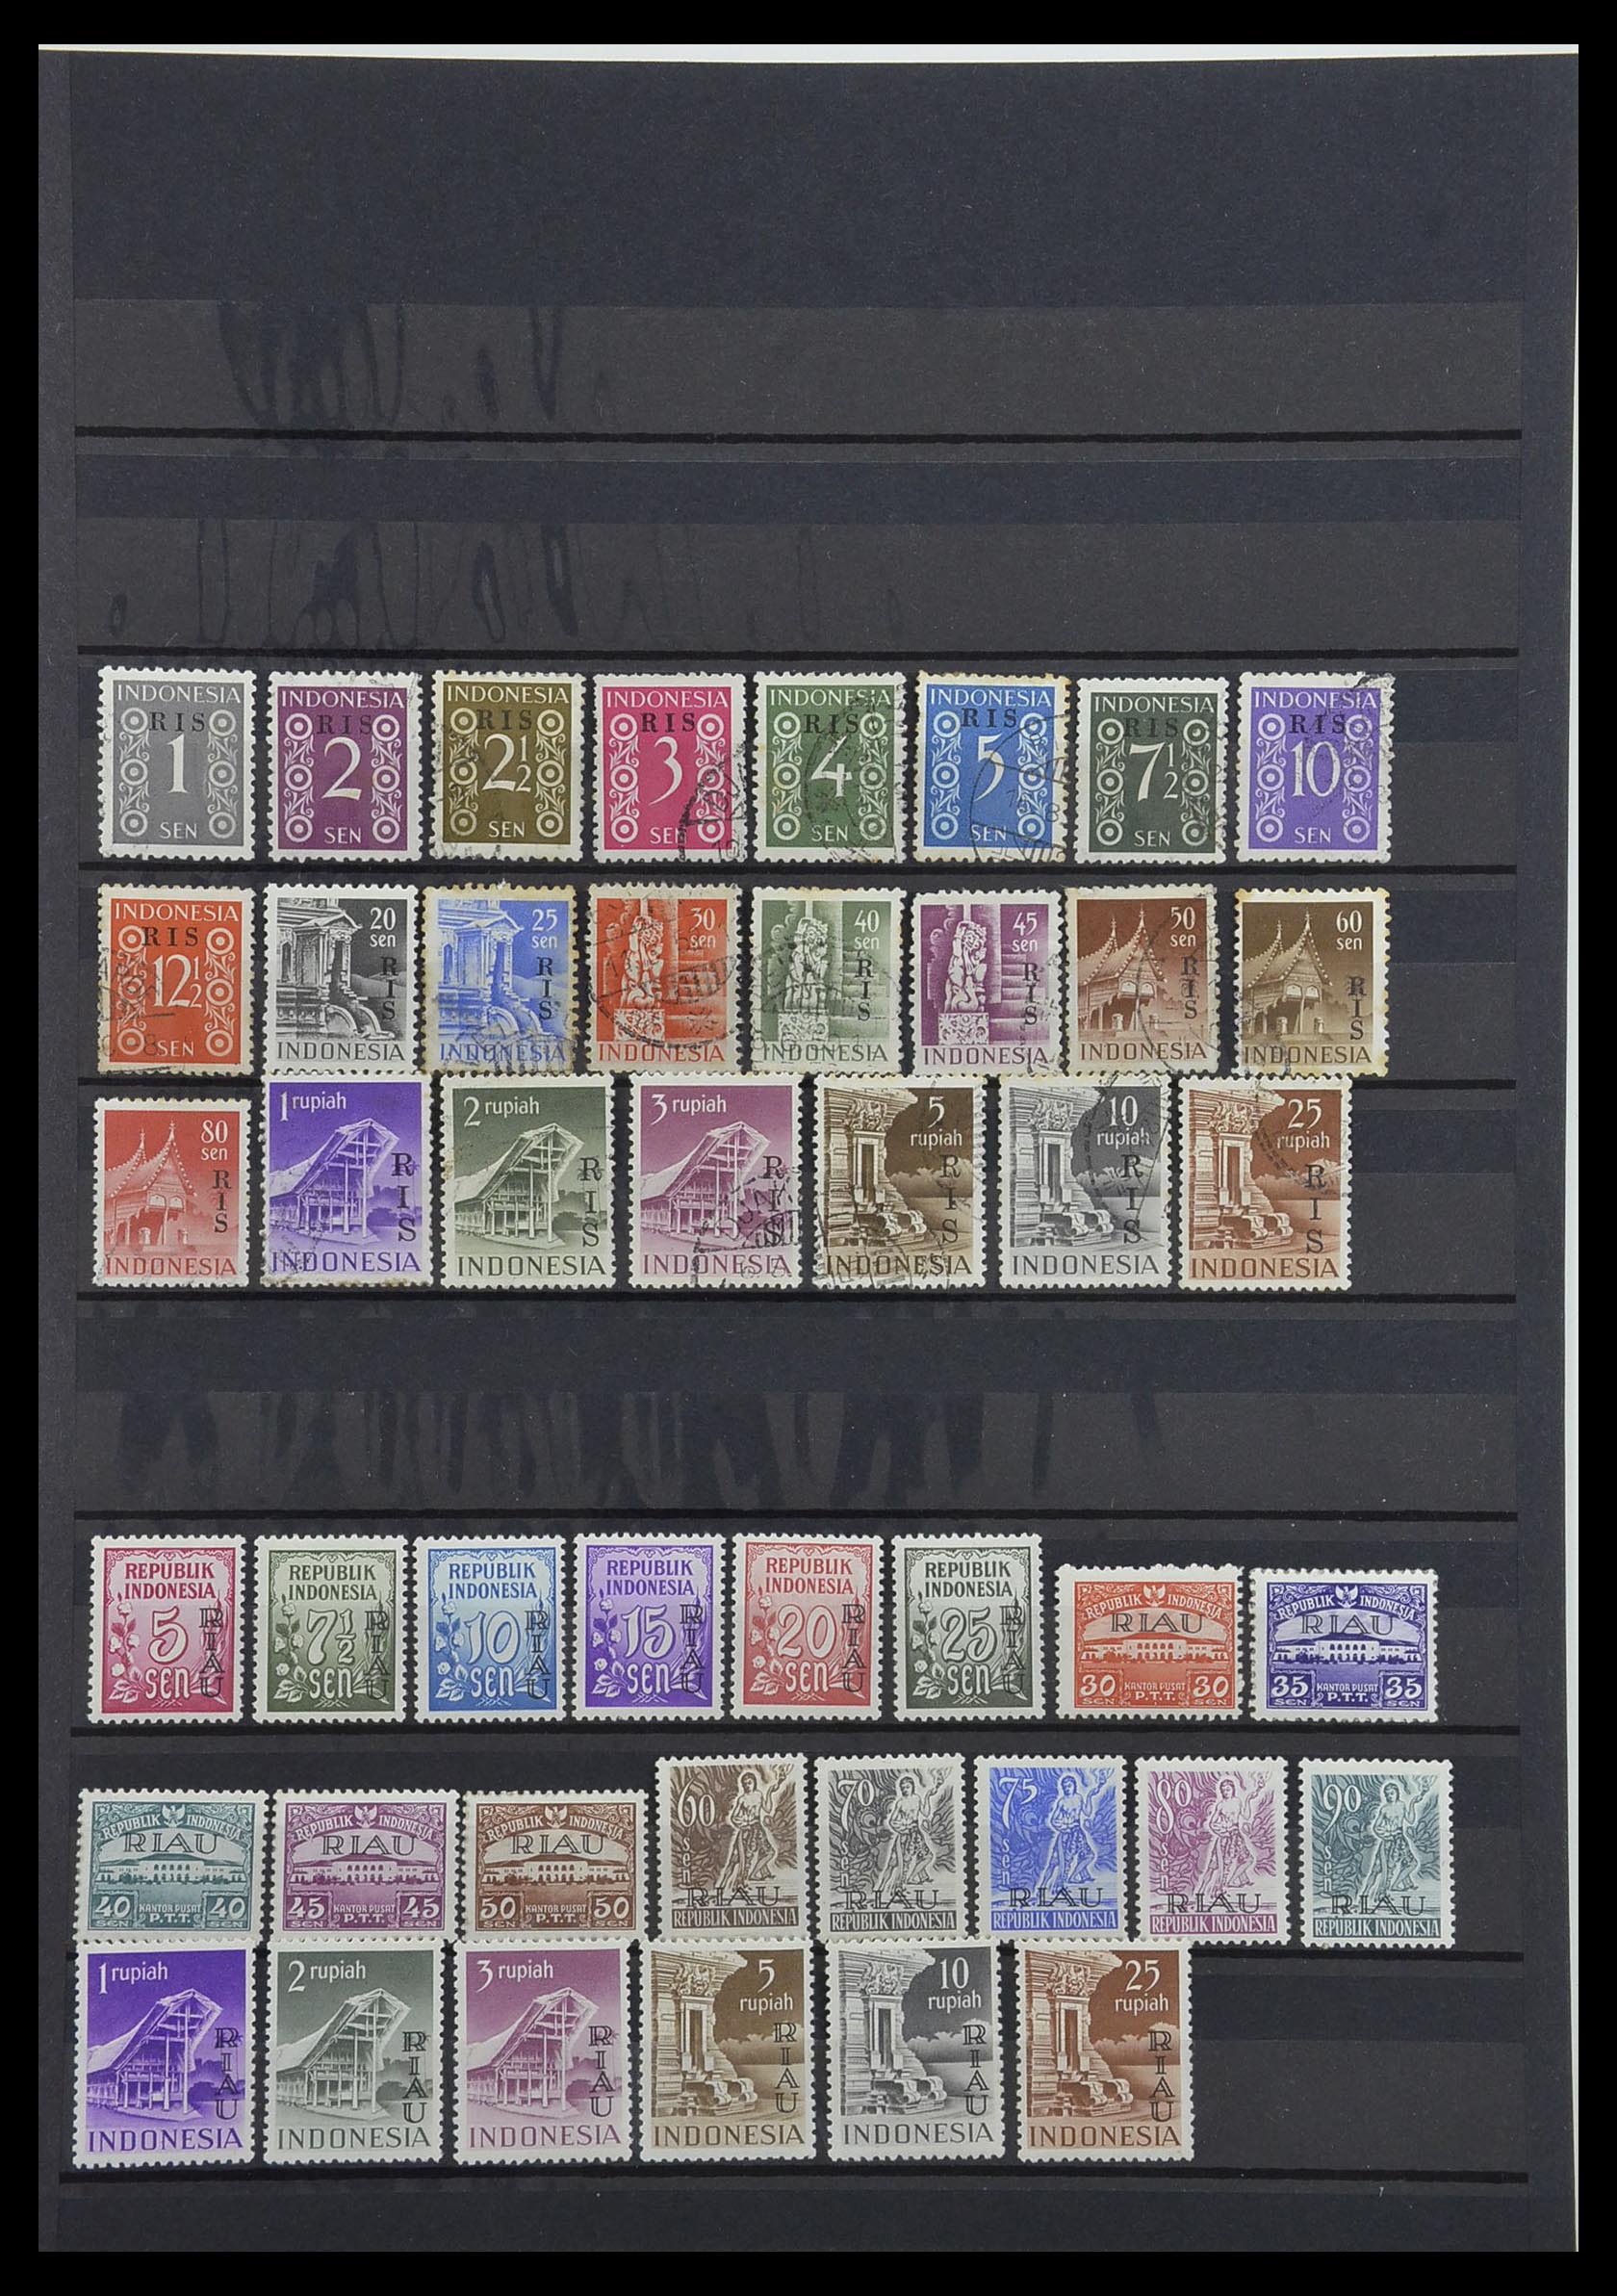 34015 001 - Stamp collection 34015 Indonesia 1950-1954.